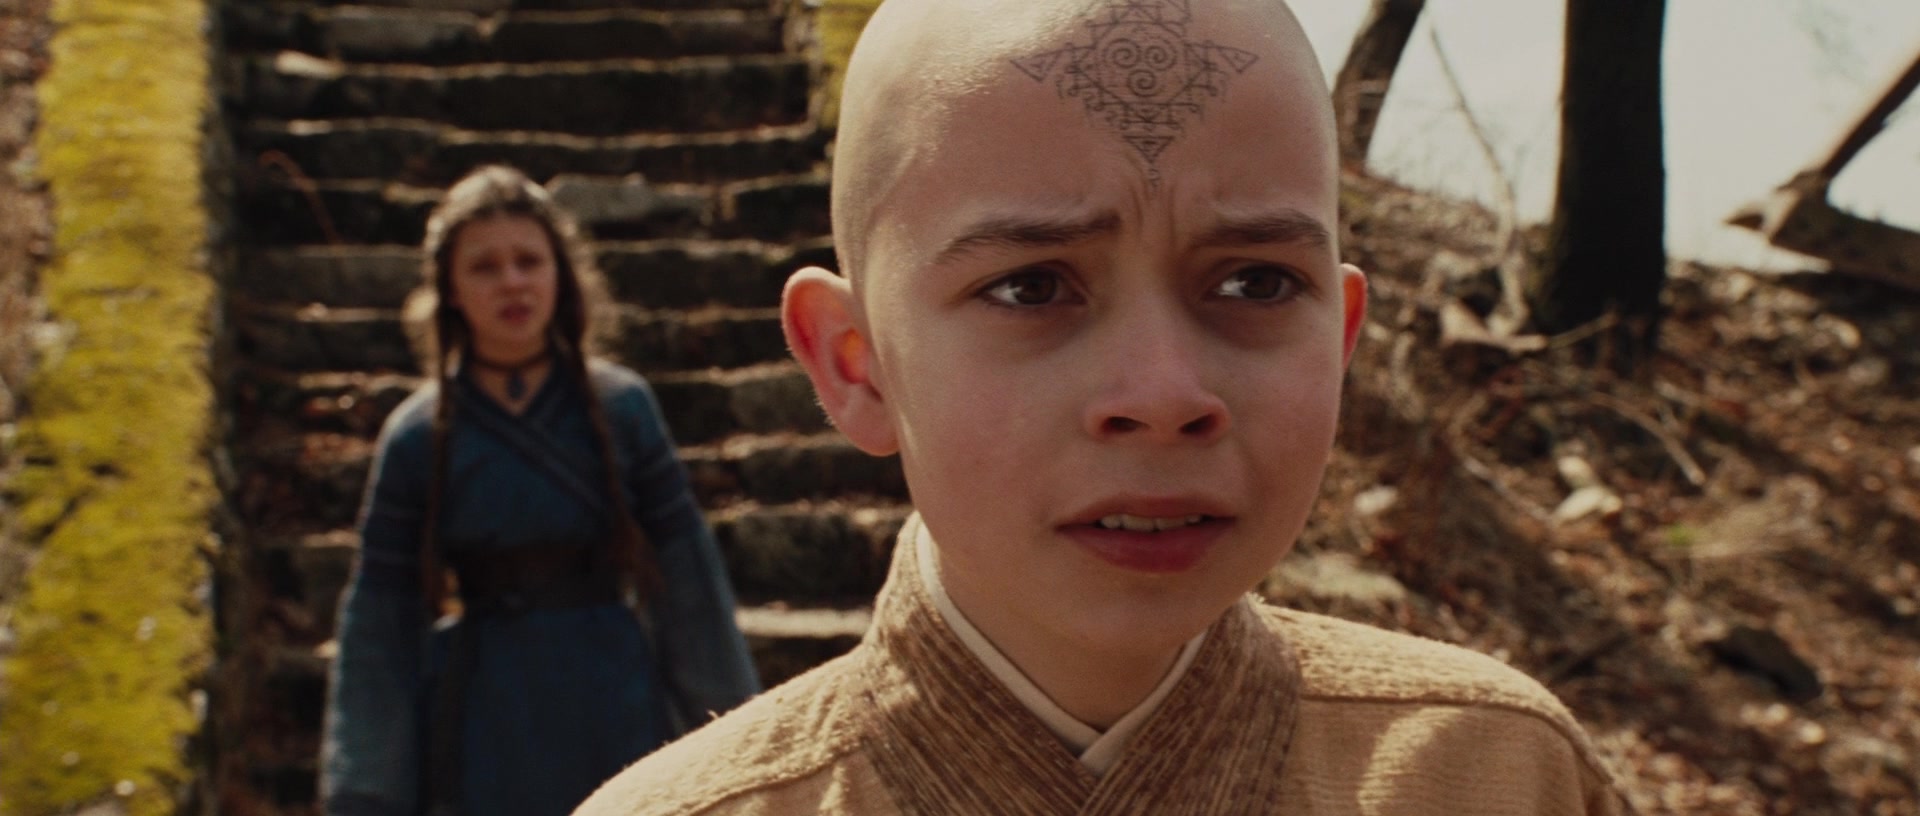 Aang (Noah Ringer) discovers the ruins of the Air Bender's Temple in The Last Airbender (2010), Paramount Pictures